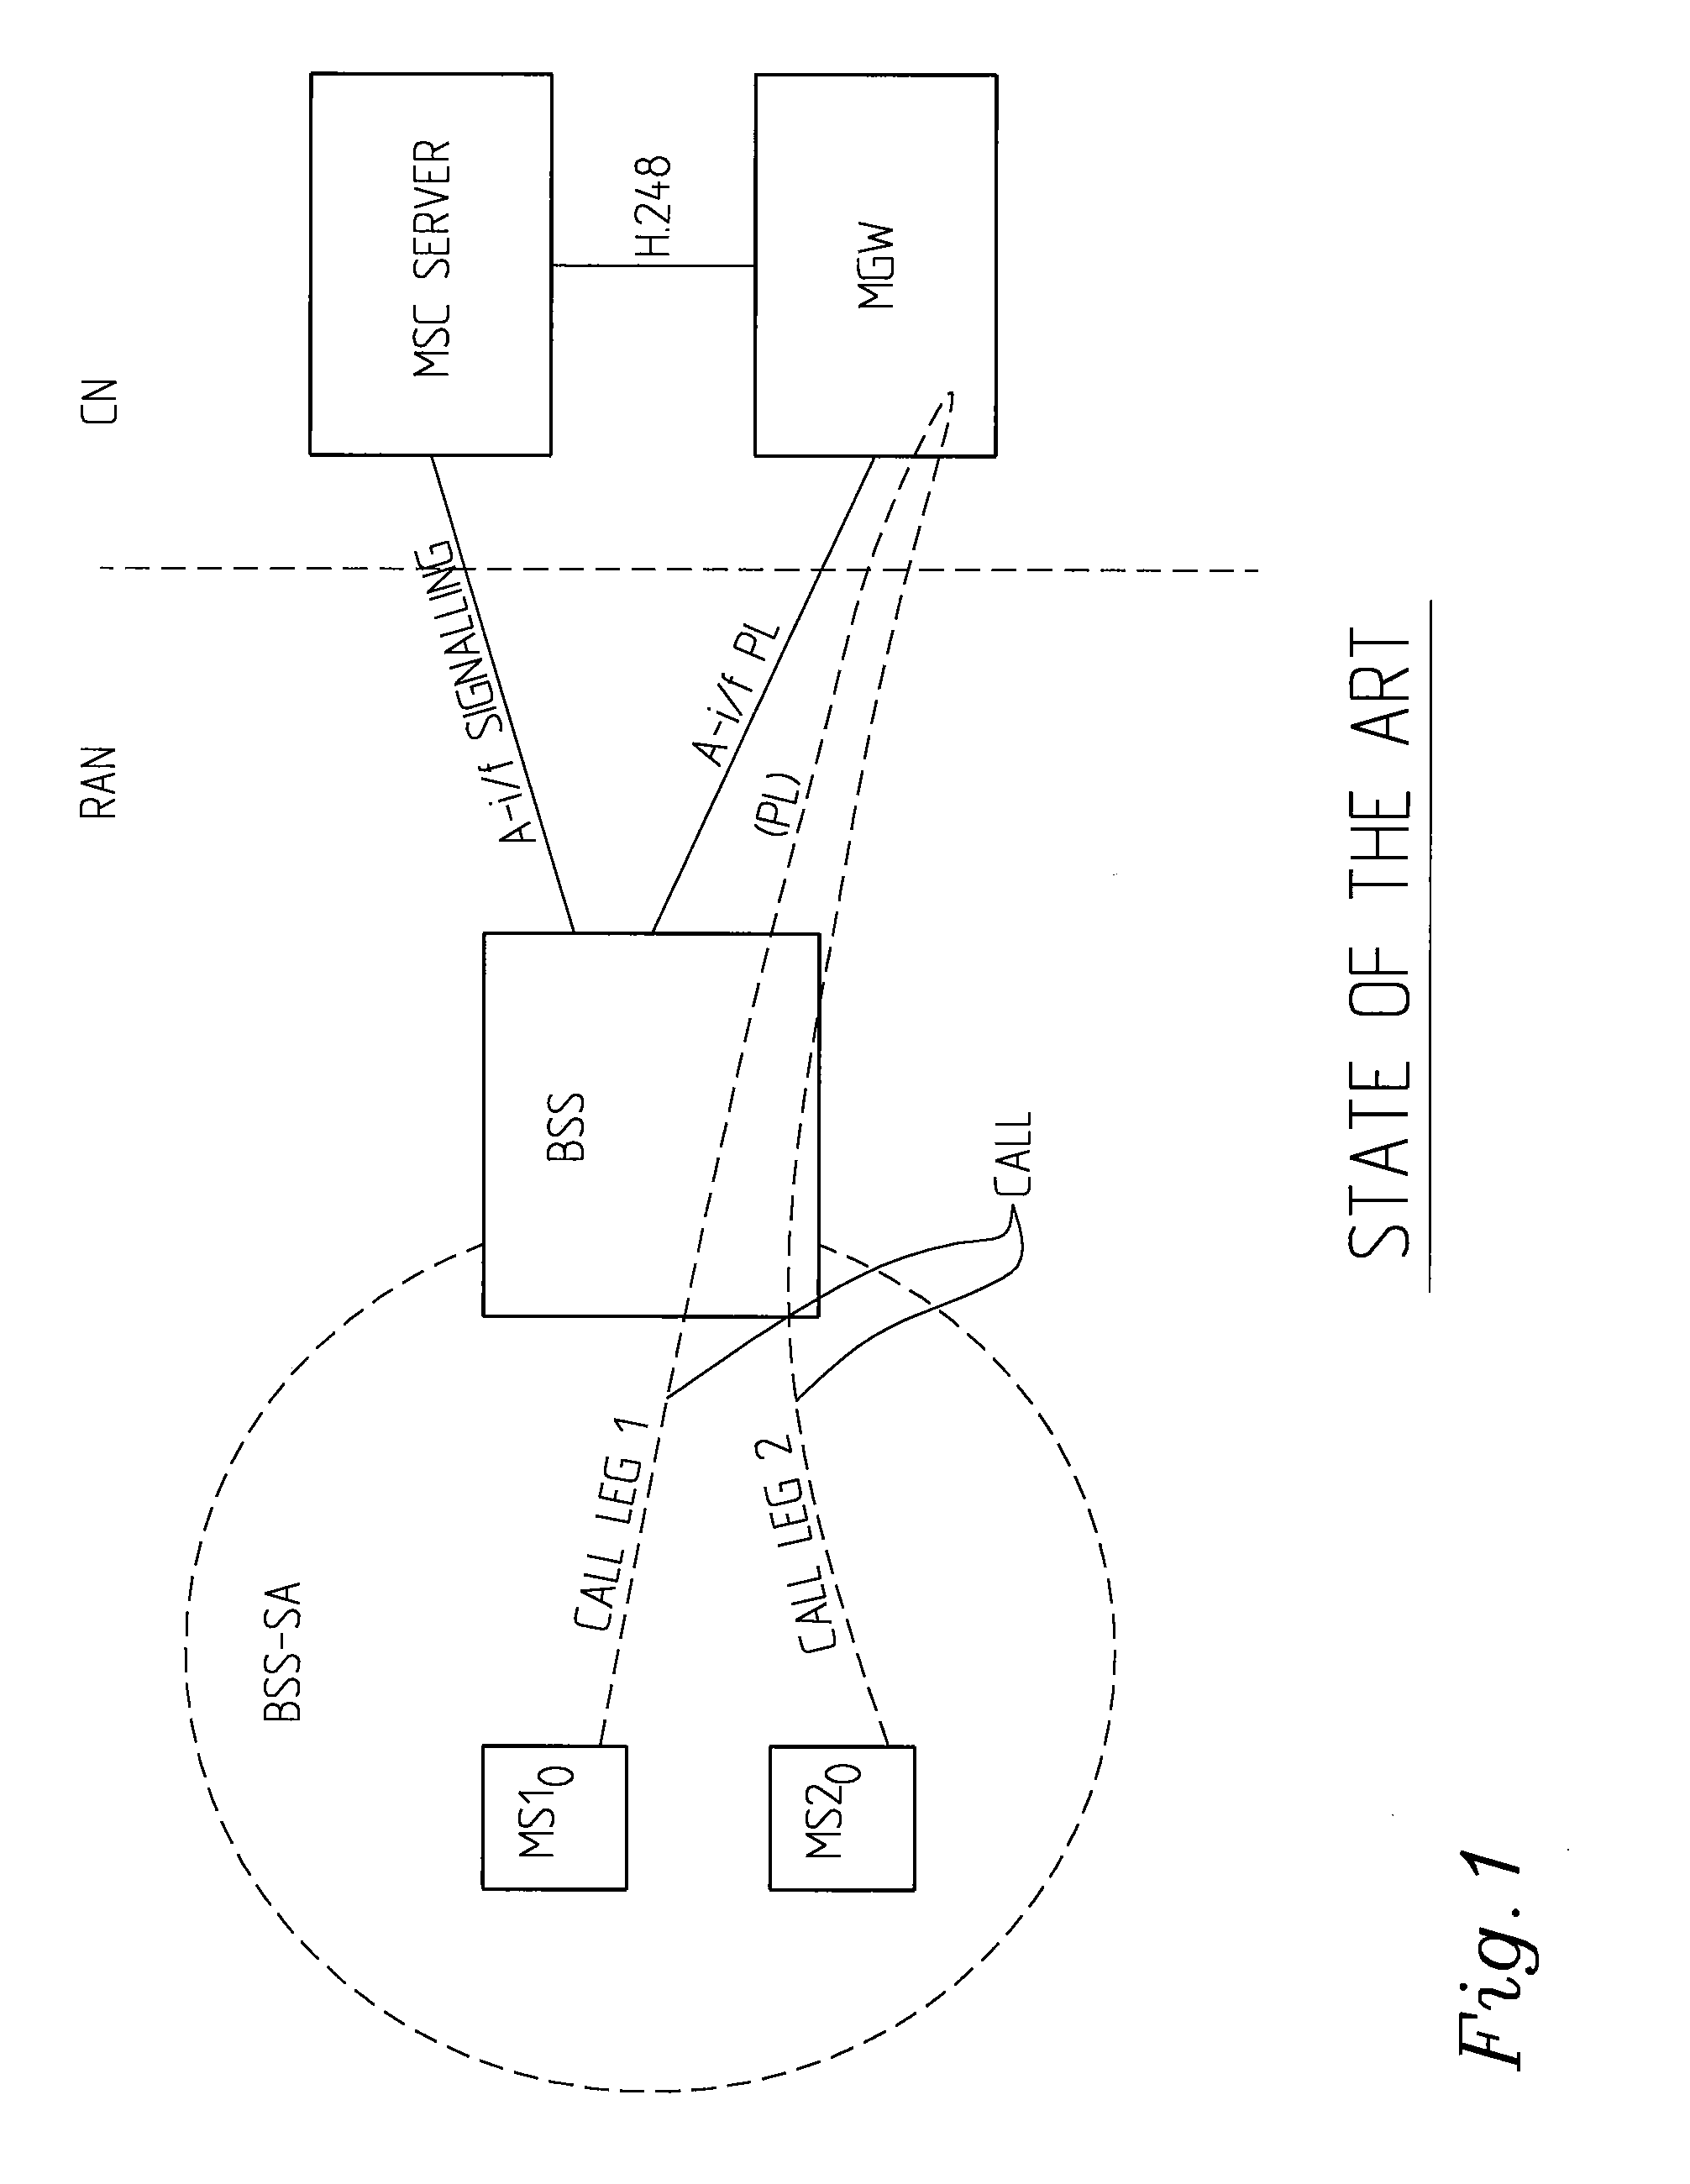 Call Handling In A Mobile Communications Network